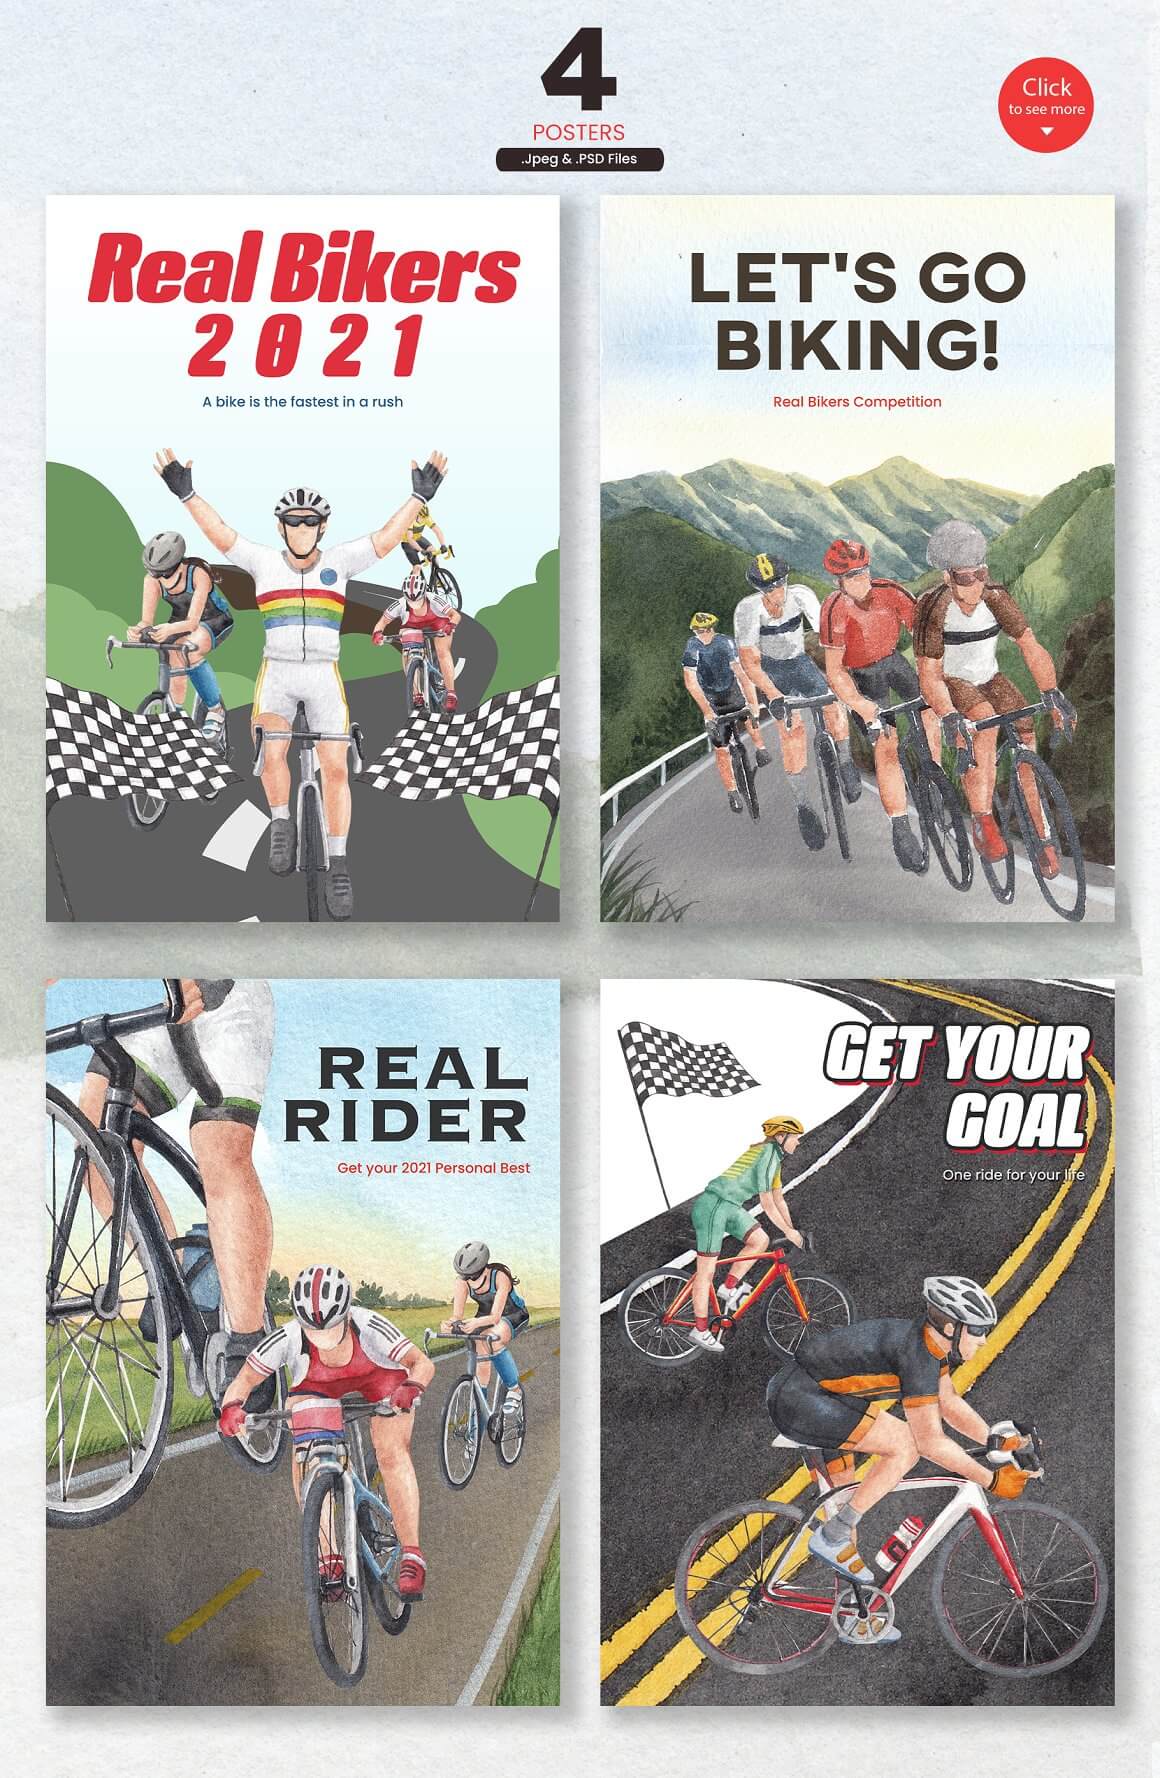 4 posters with images of cyclists and inscriptions about bikers.